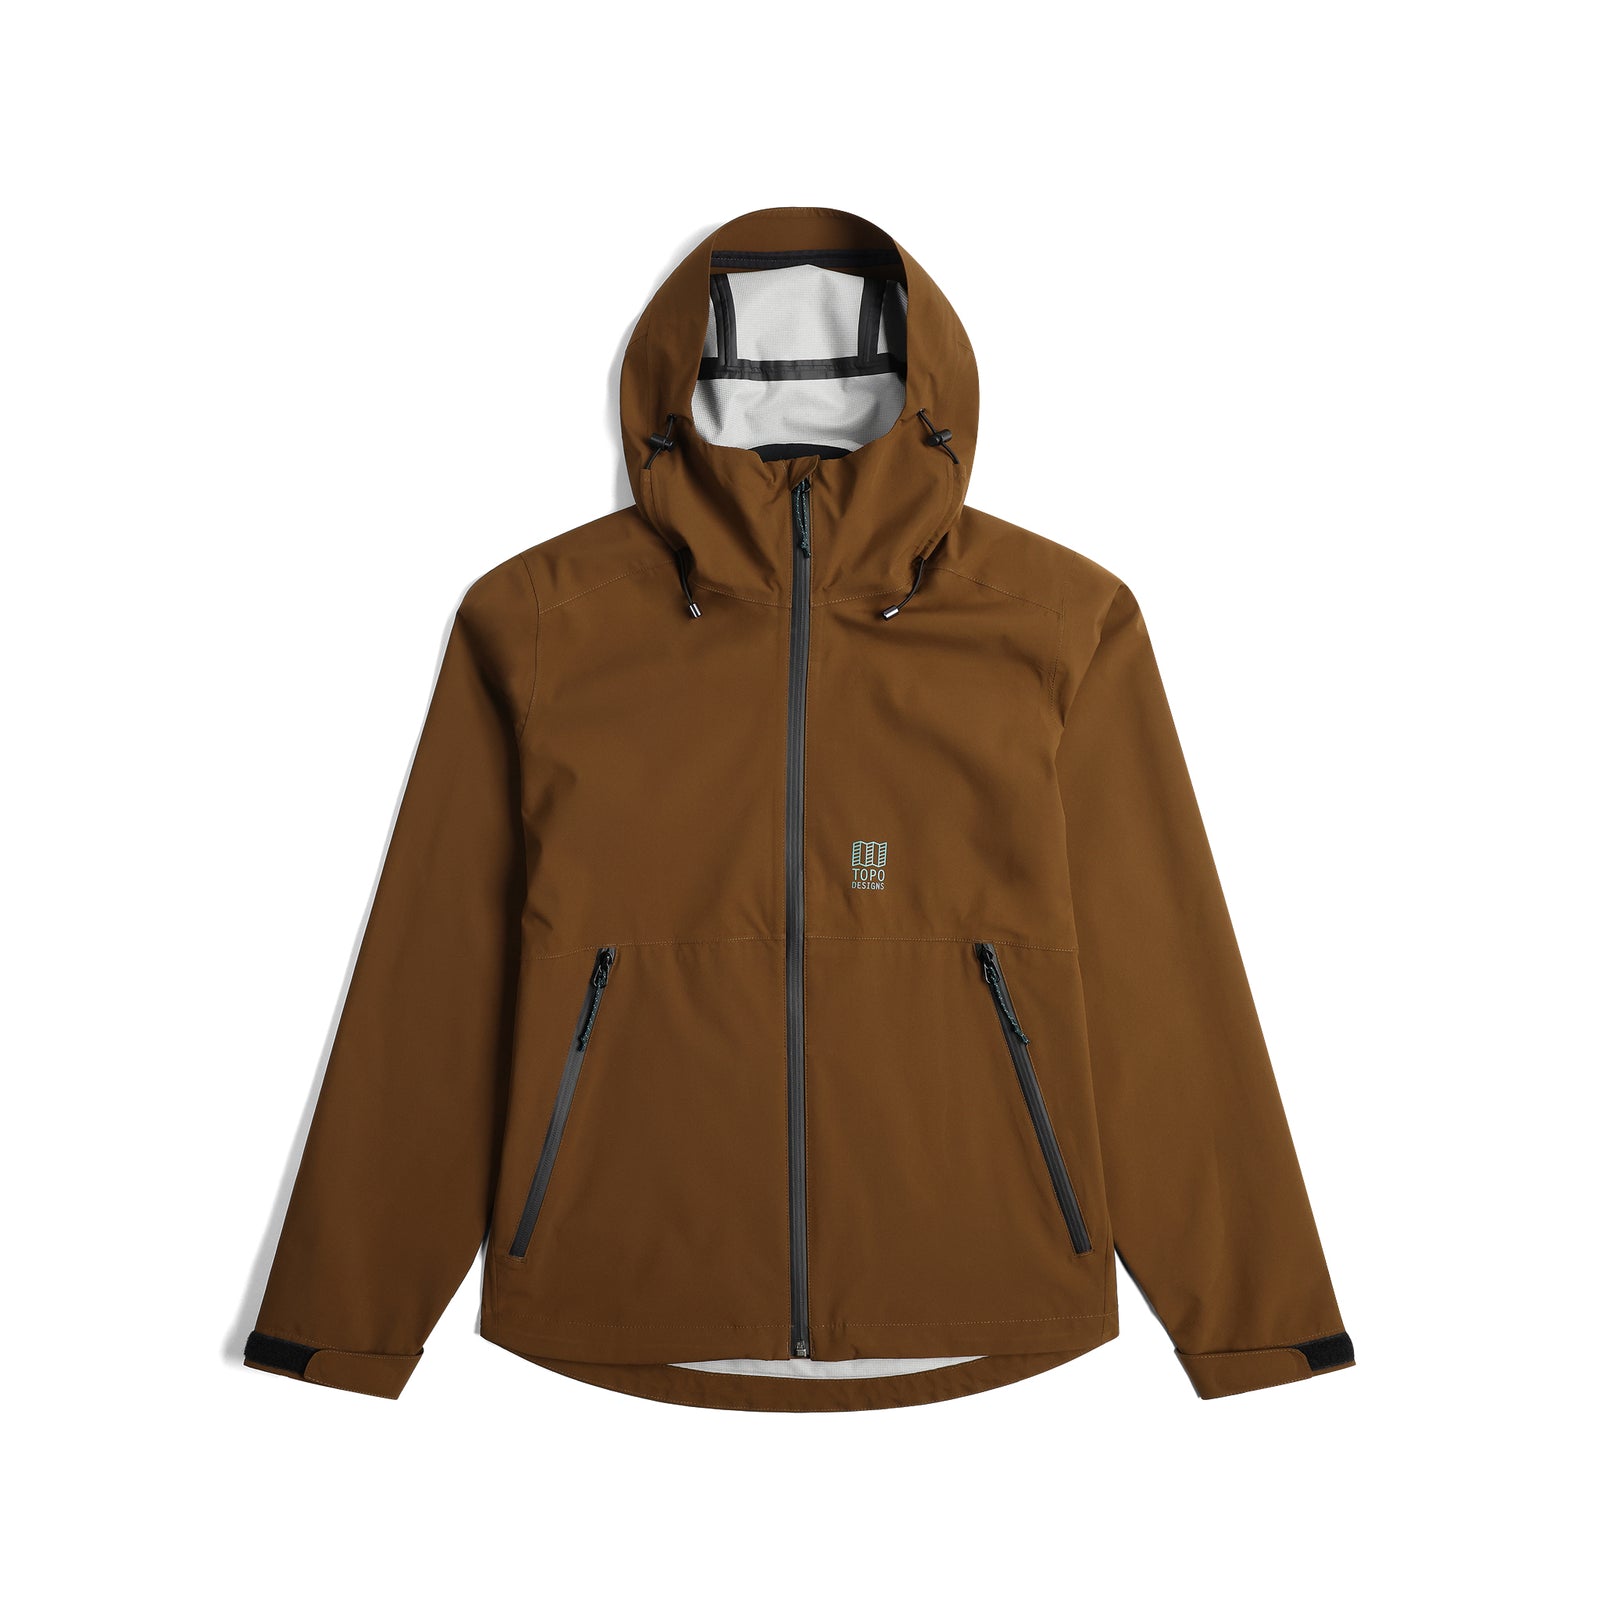 Front View of Topo Designs Global Jacket - Women's in "Desert Palm"